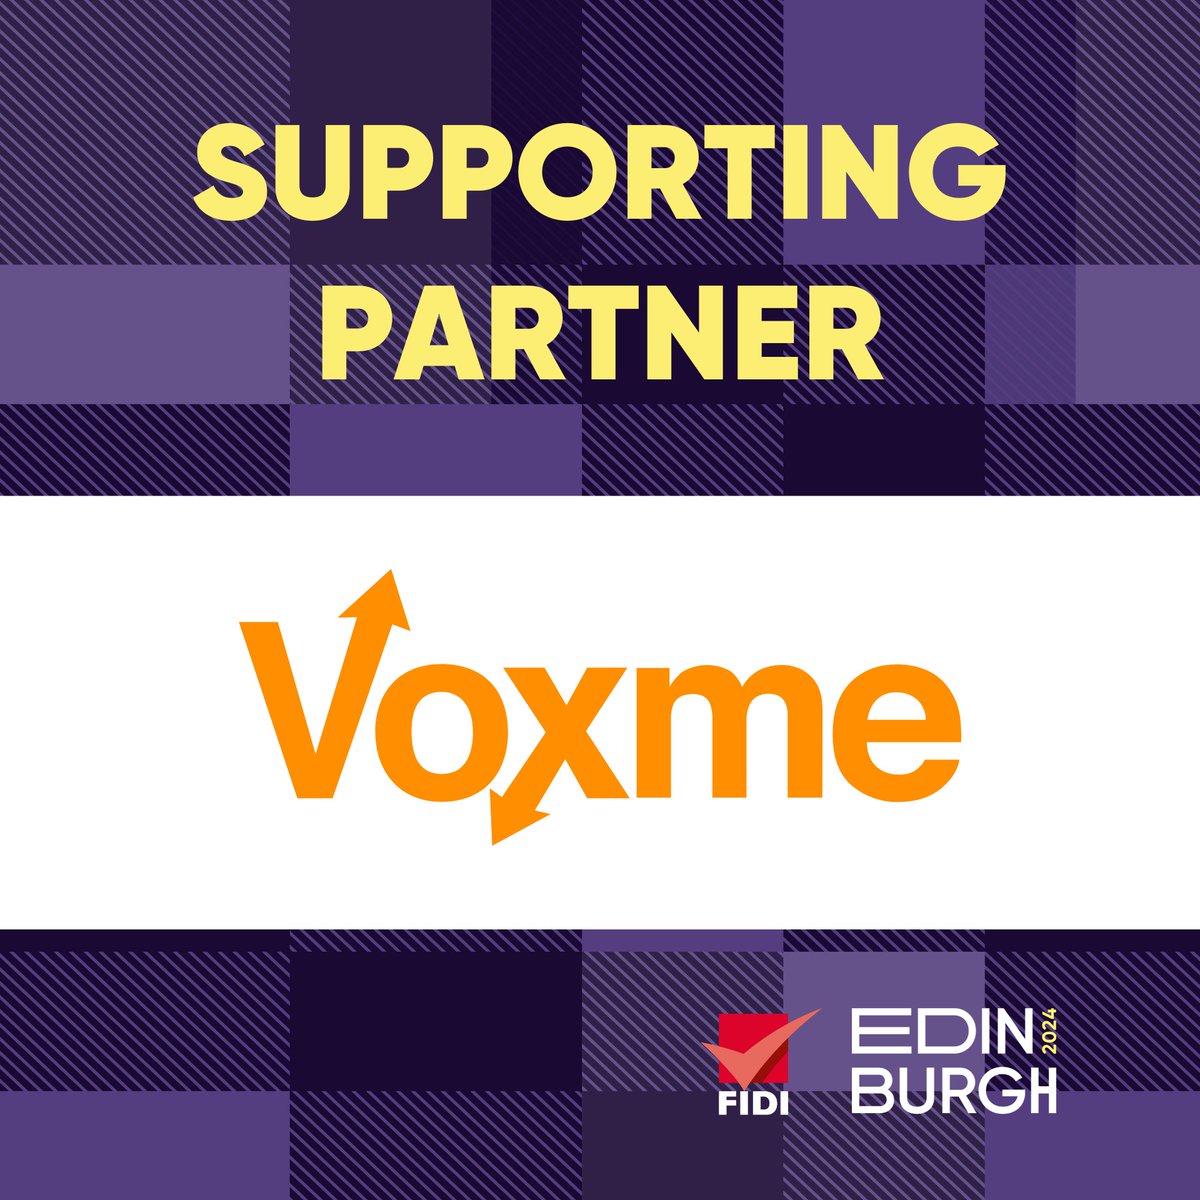 🌍 #2024FIDIconference: Thank you, Voxme Software Inc for being a partner of the 2024 FIDI Conference in Edinburgh! If you're interested in becoming a sponsor, please contact sales@fidifocus.org #FIDIconference #Scotland #Edinburgh #Moving #Relocation